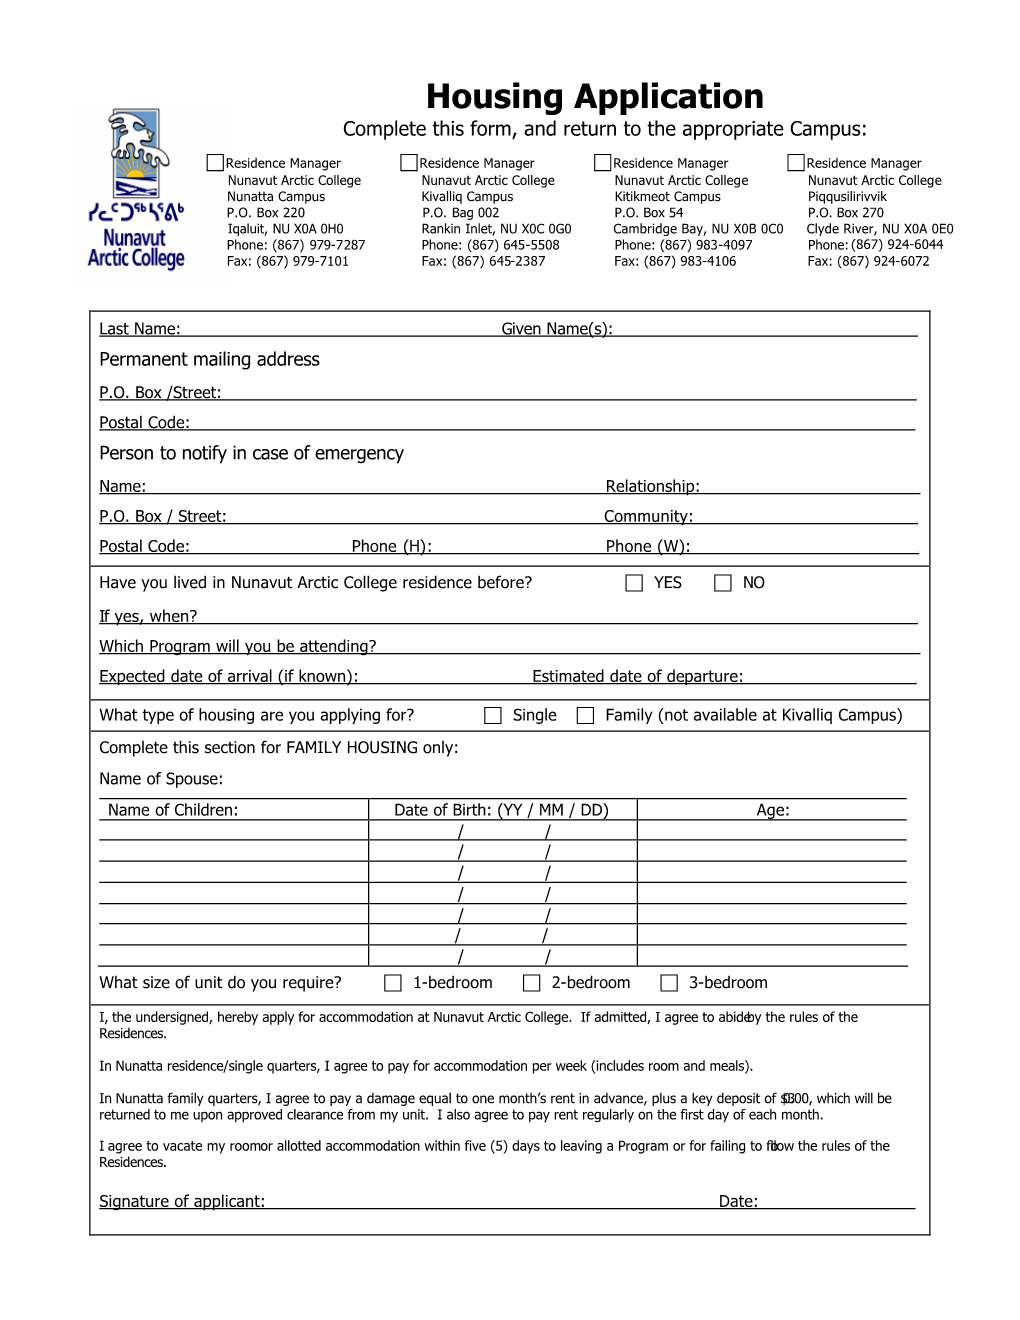 Housing Application Complete This Form, and Return to the Appropriate Campus